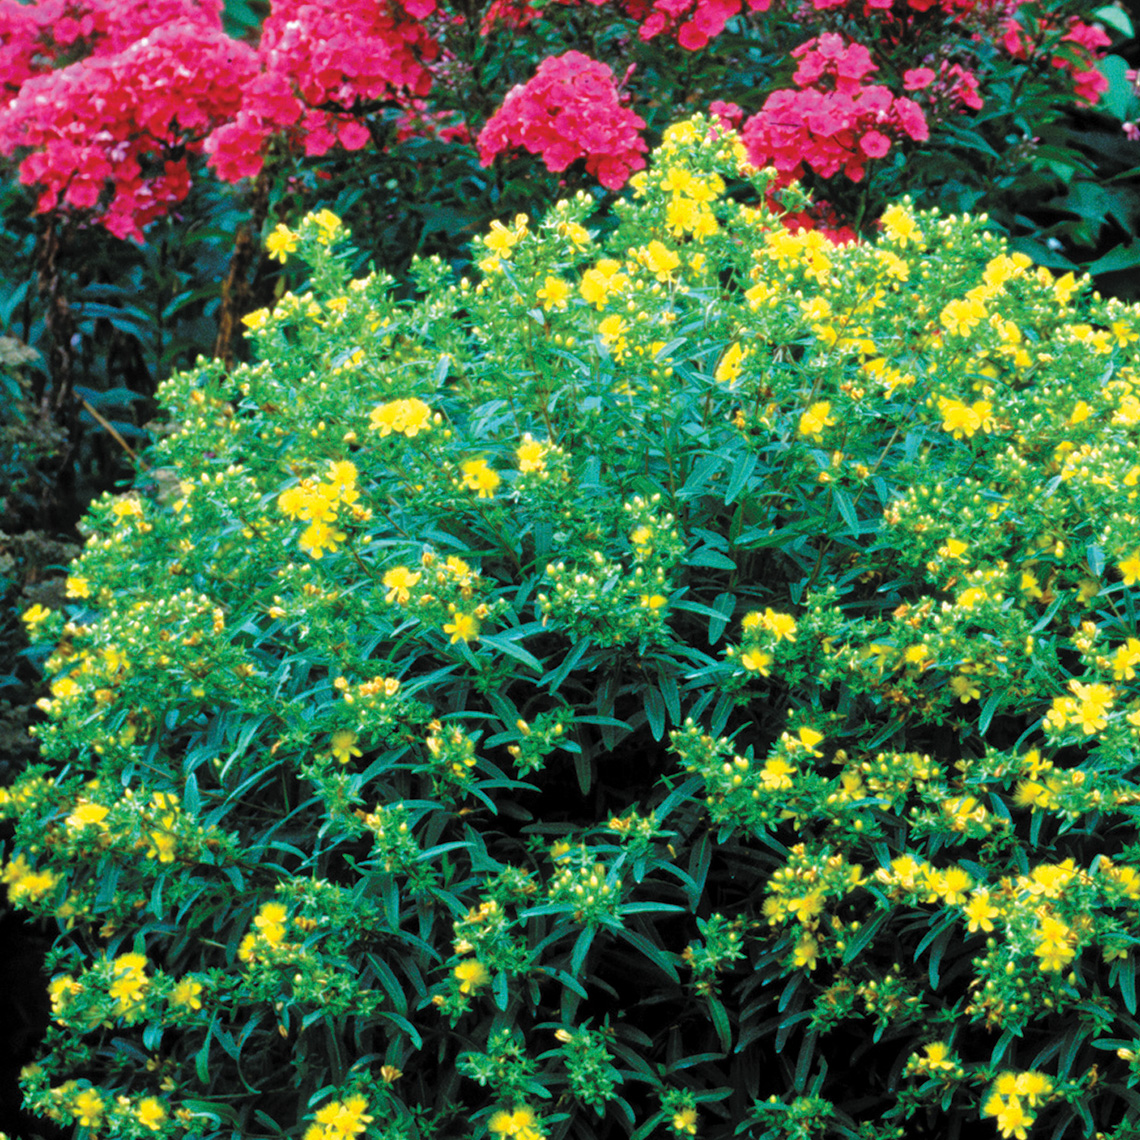 Gemo hypericum in the landscape with yellow flowers and blue foliage